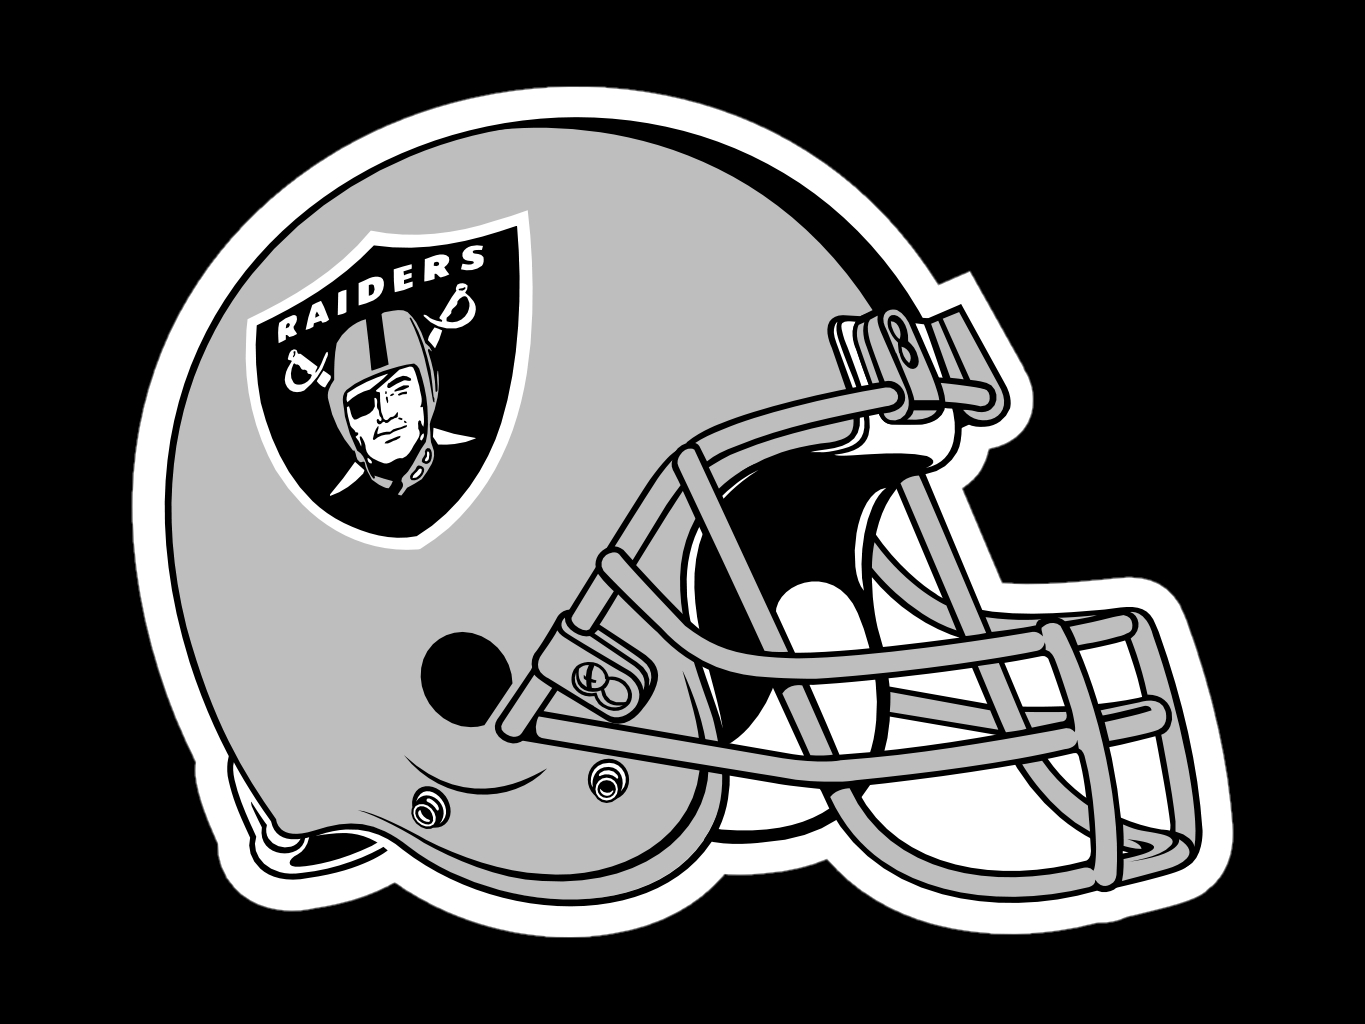 Clip Arts Related To : oakland raiders. view all Raiders Cliparts Logo). 